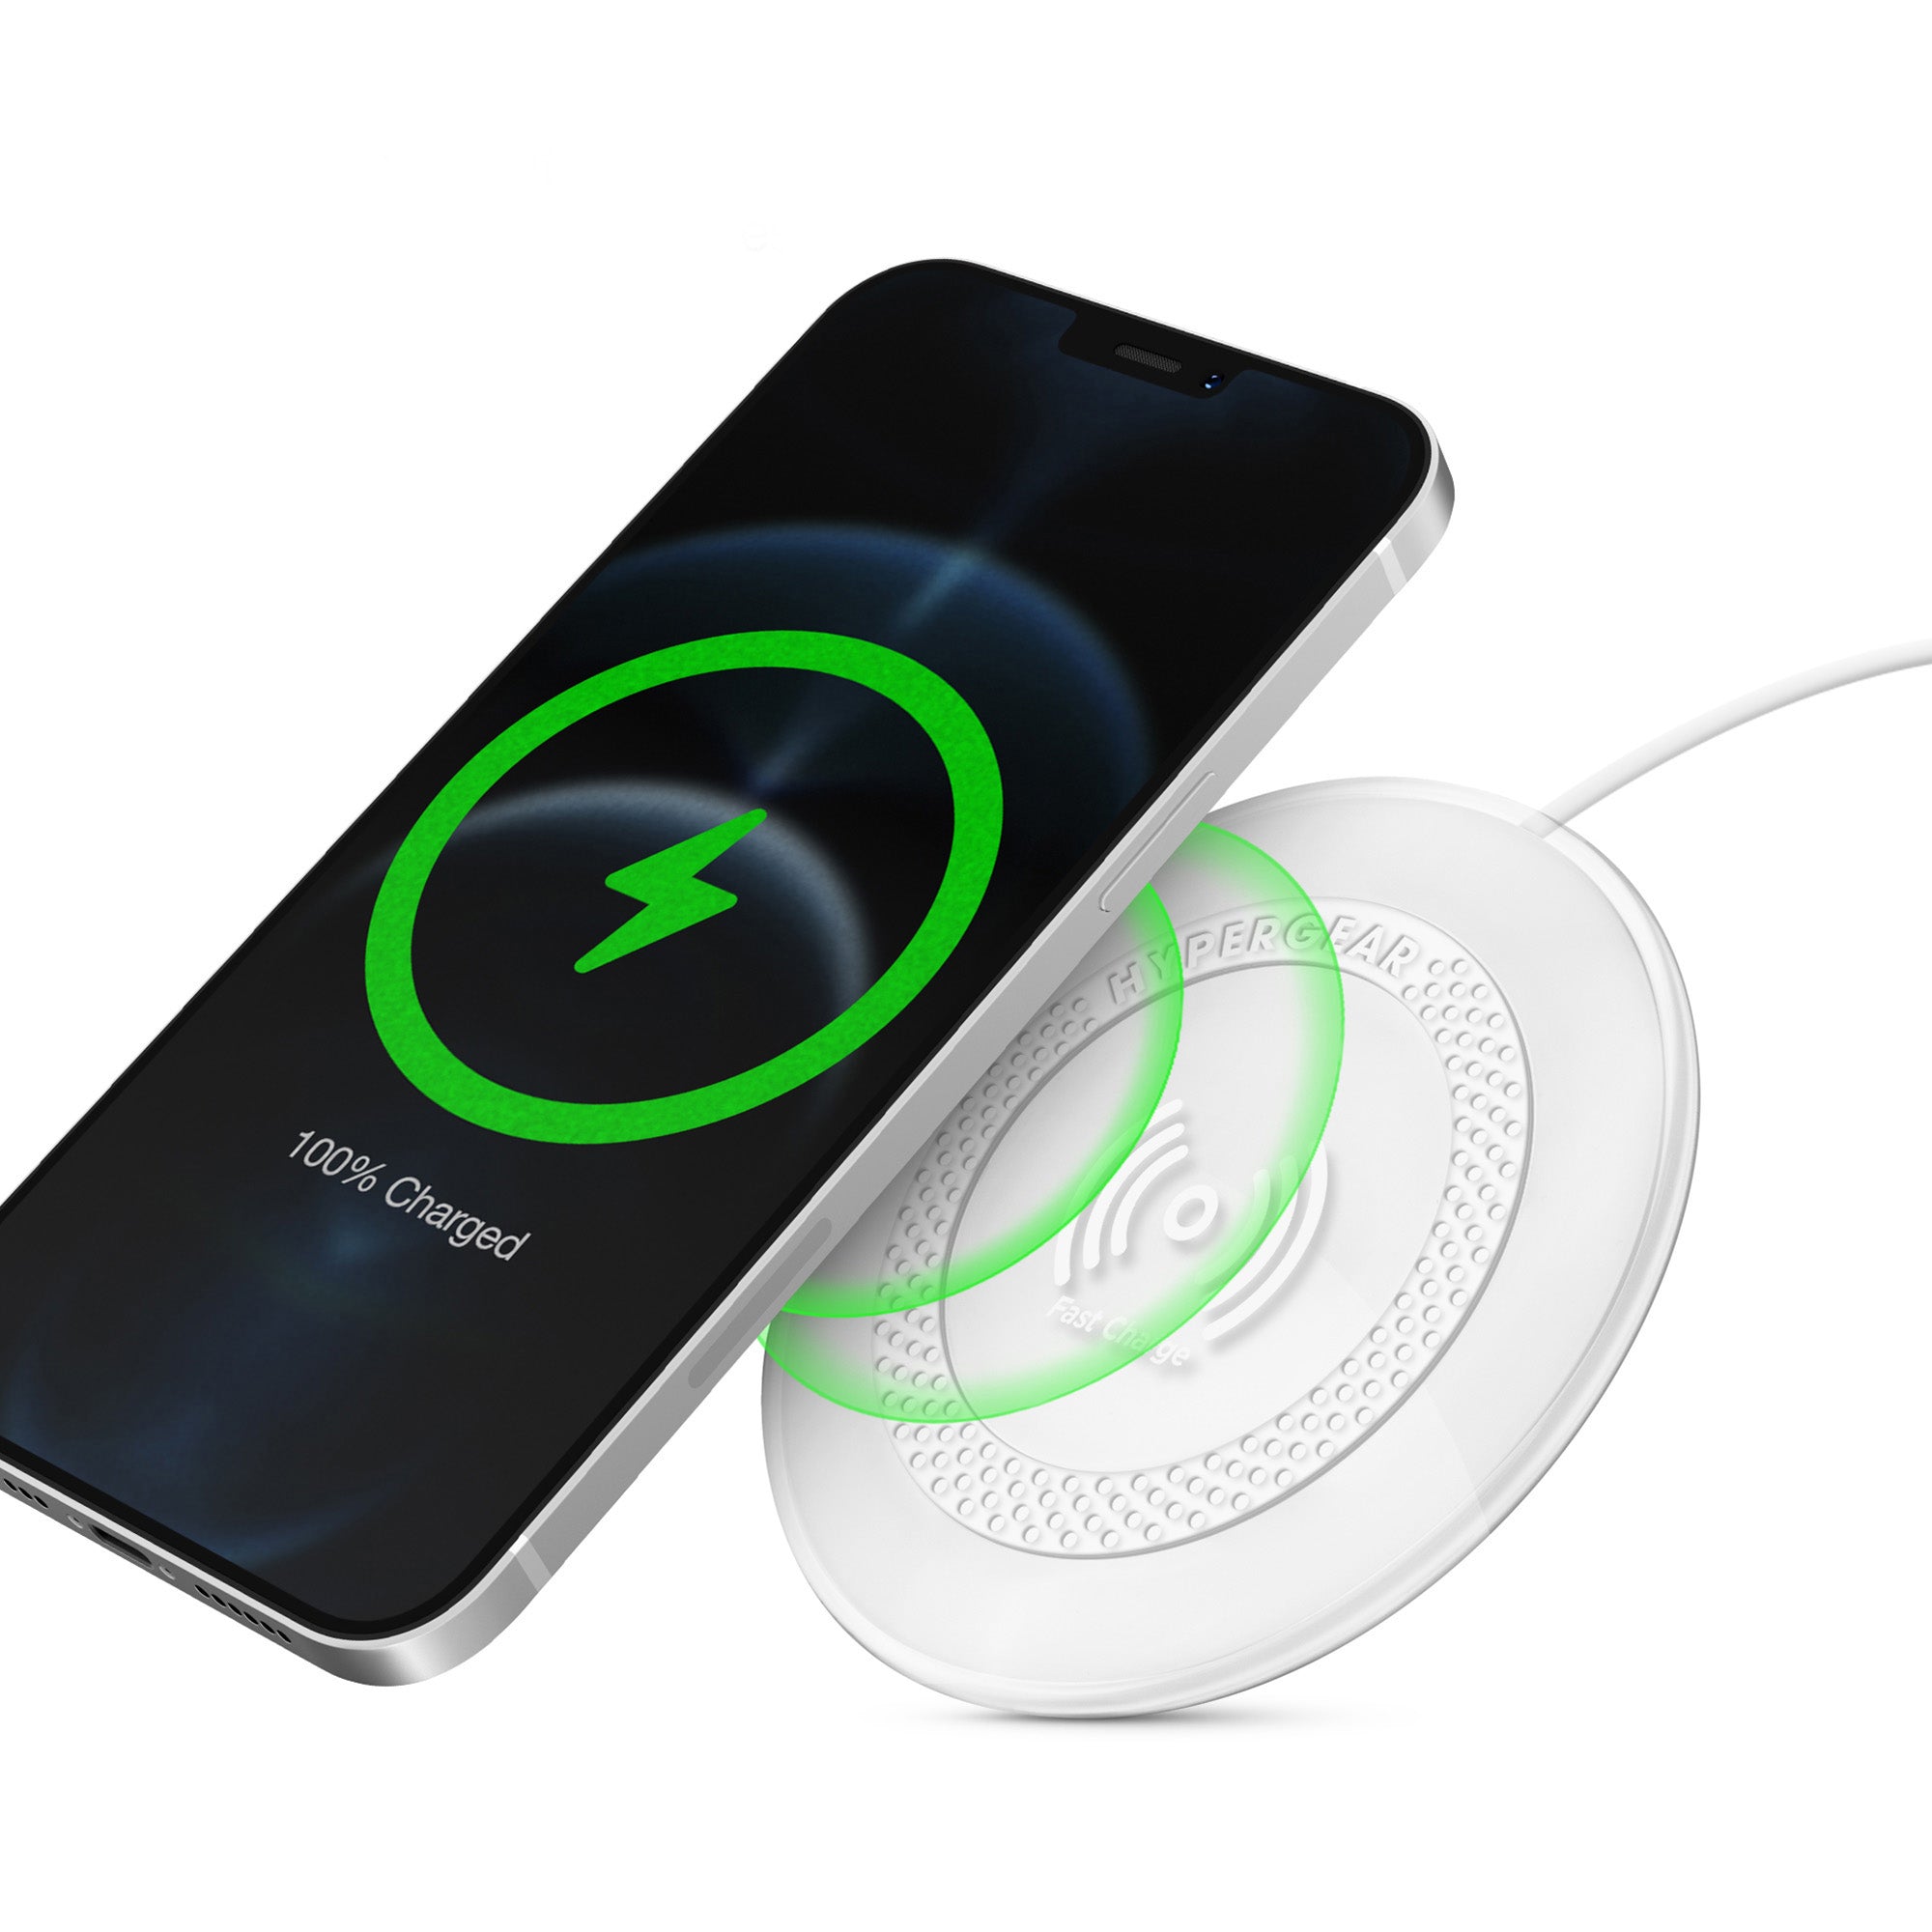 HyperGear 15W ChargePad Pro Wireless Fast Charger w/ USB-C Hub - White - 15-12063